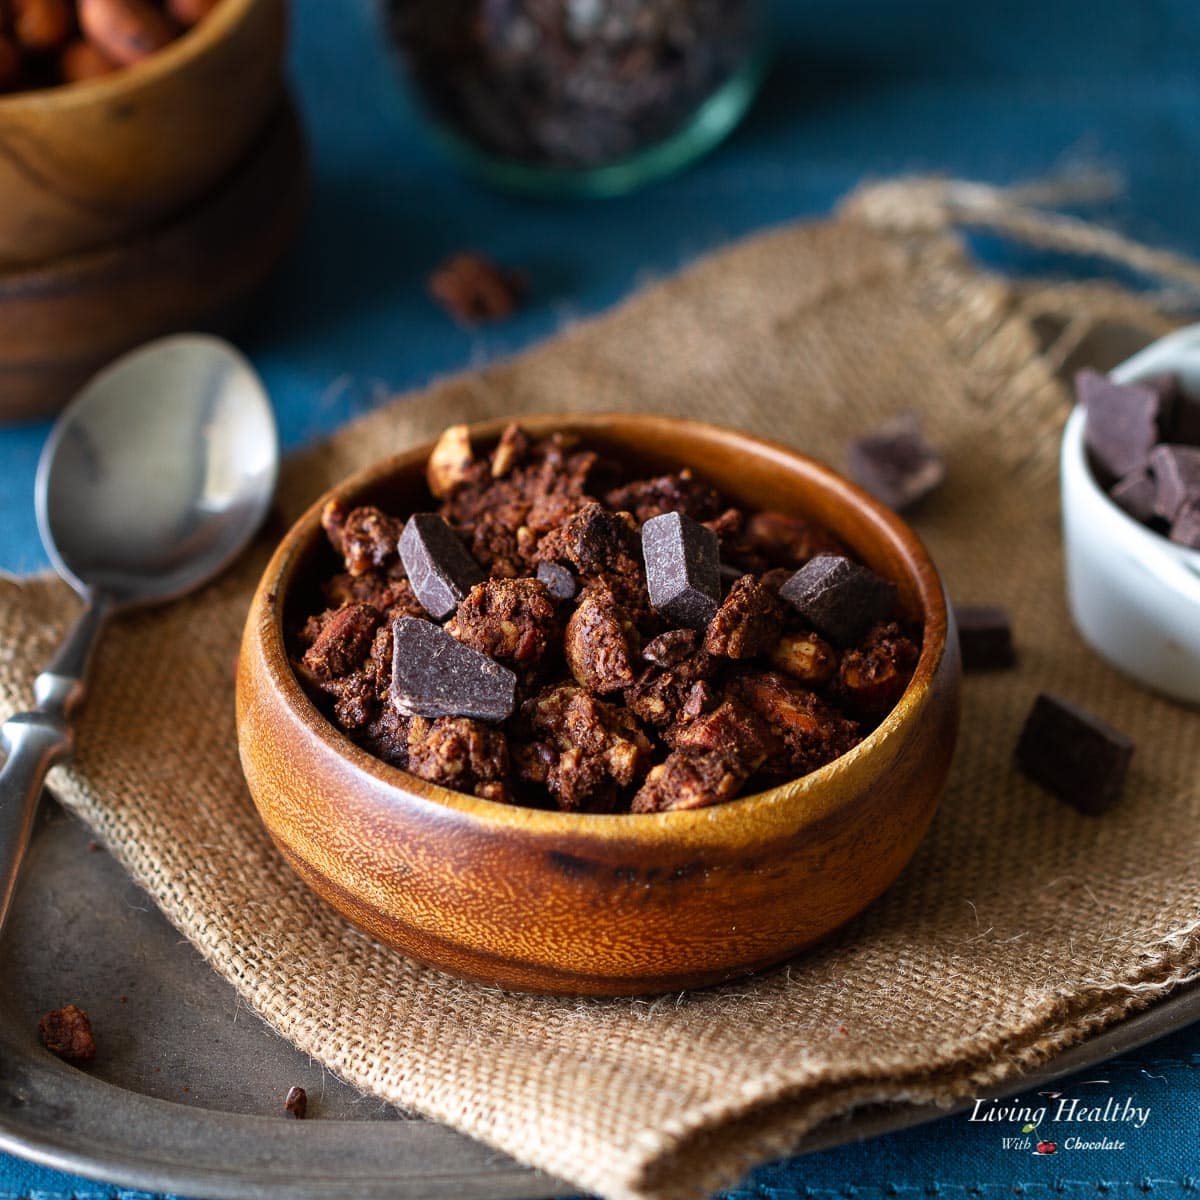 wooden bowl filled with chocolate granola sprinkled with large chocolate chips and a spoon next to it.